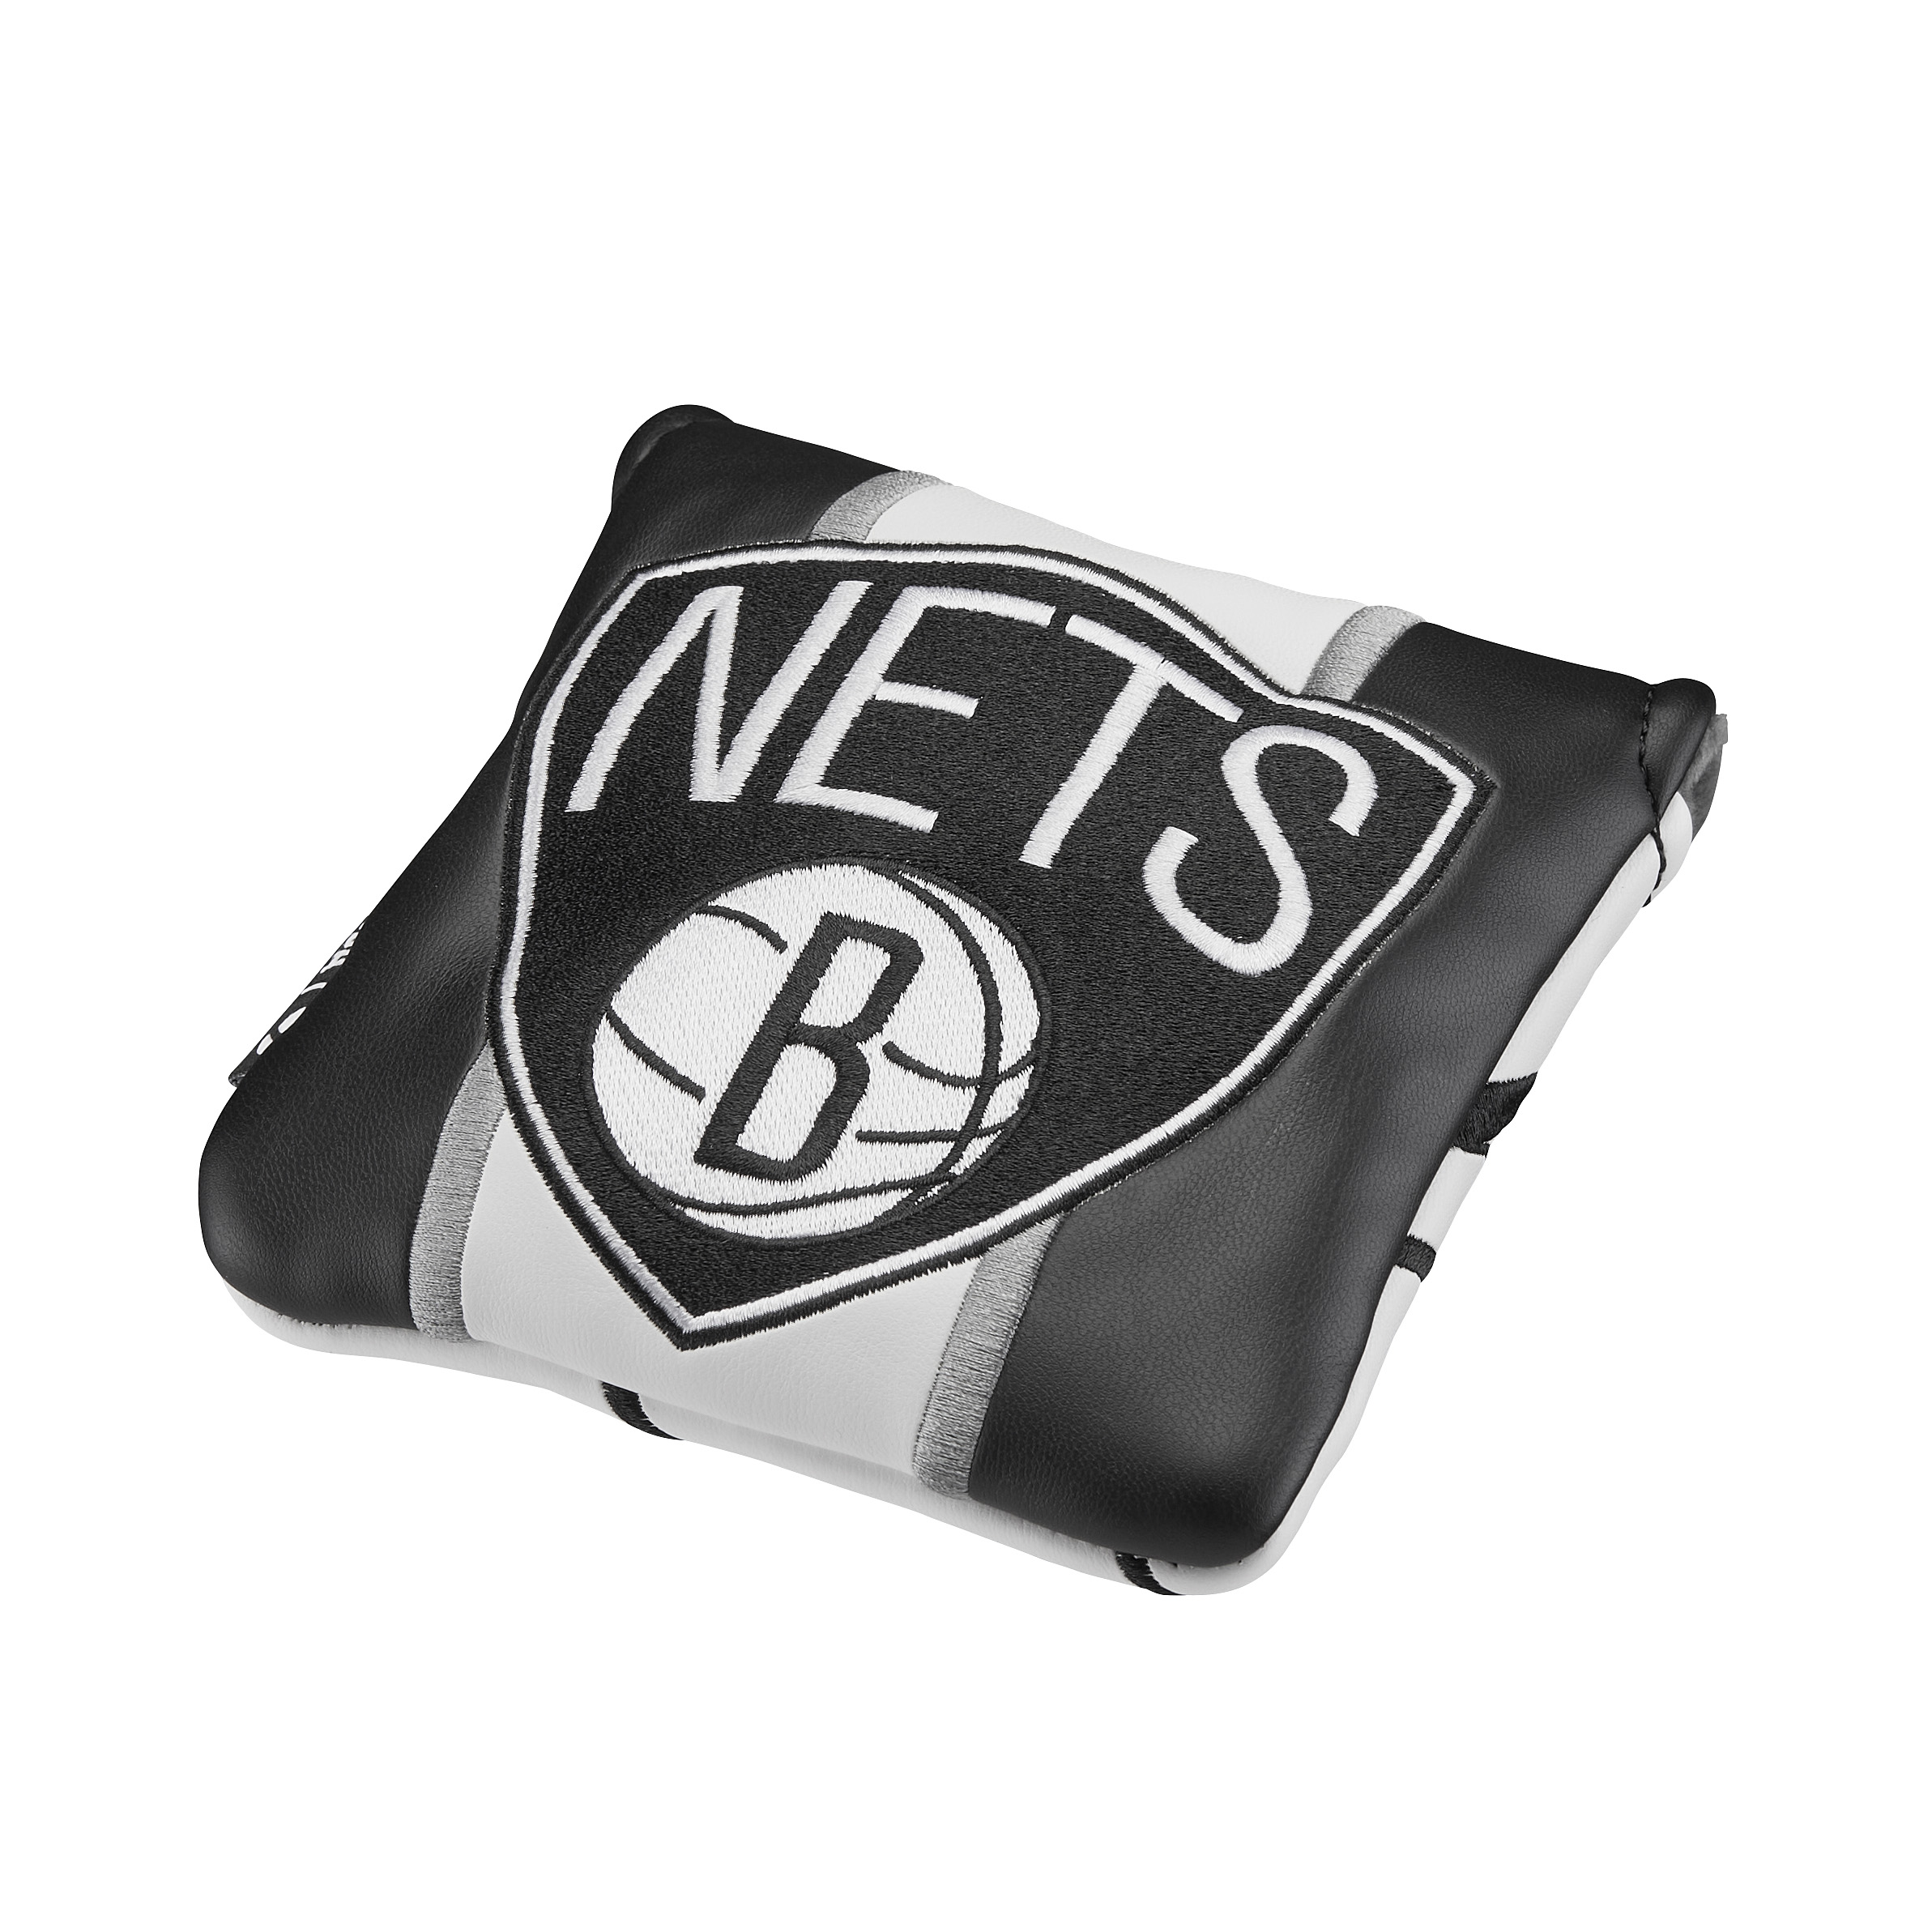 Brooklyn Nets Spider Headcover